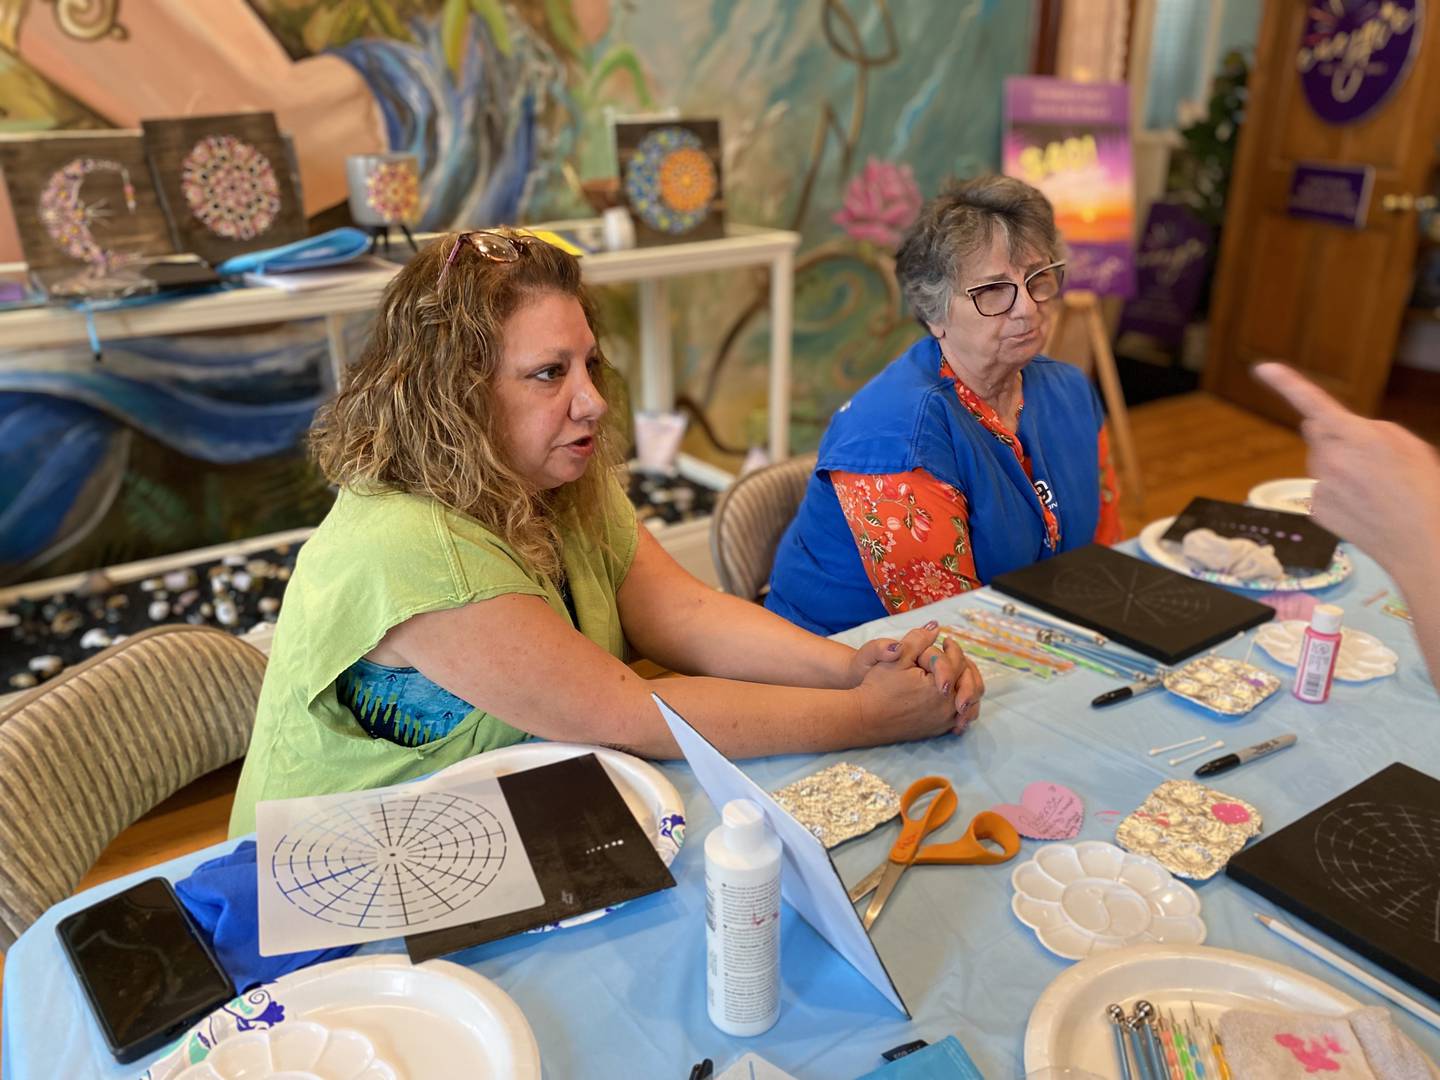 Angel Staub (on the left) hosts Mandala Painting Event on Sunday, June 4, during the grand-opening of Energie Salt Studio Spirit and assists Linda Williams (on the right).